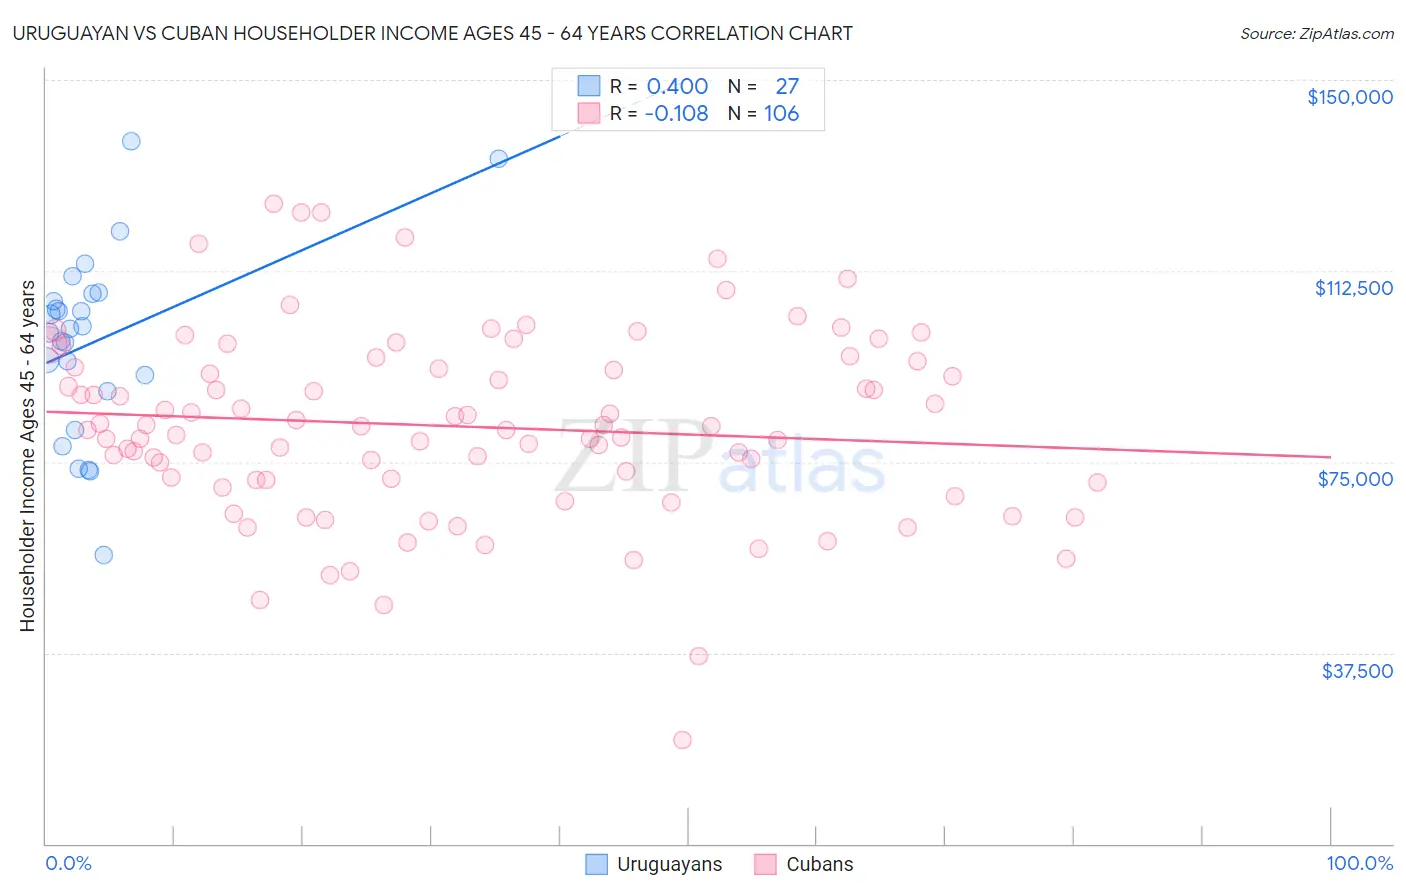 Uruguayan vs Cuban Householder Income Ages 45 - 64 years